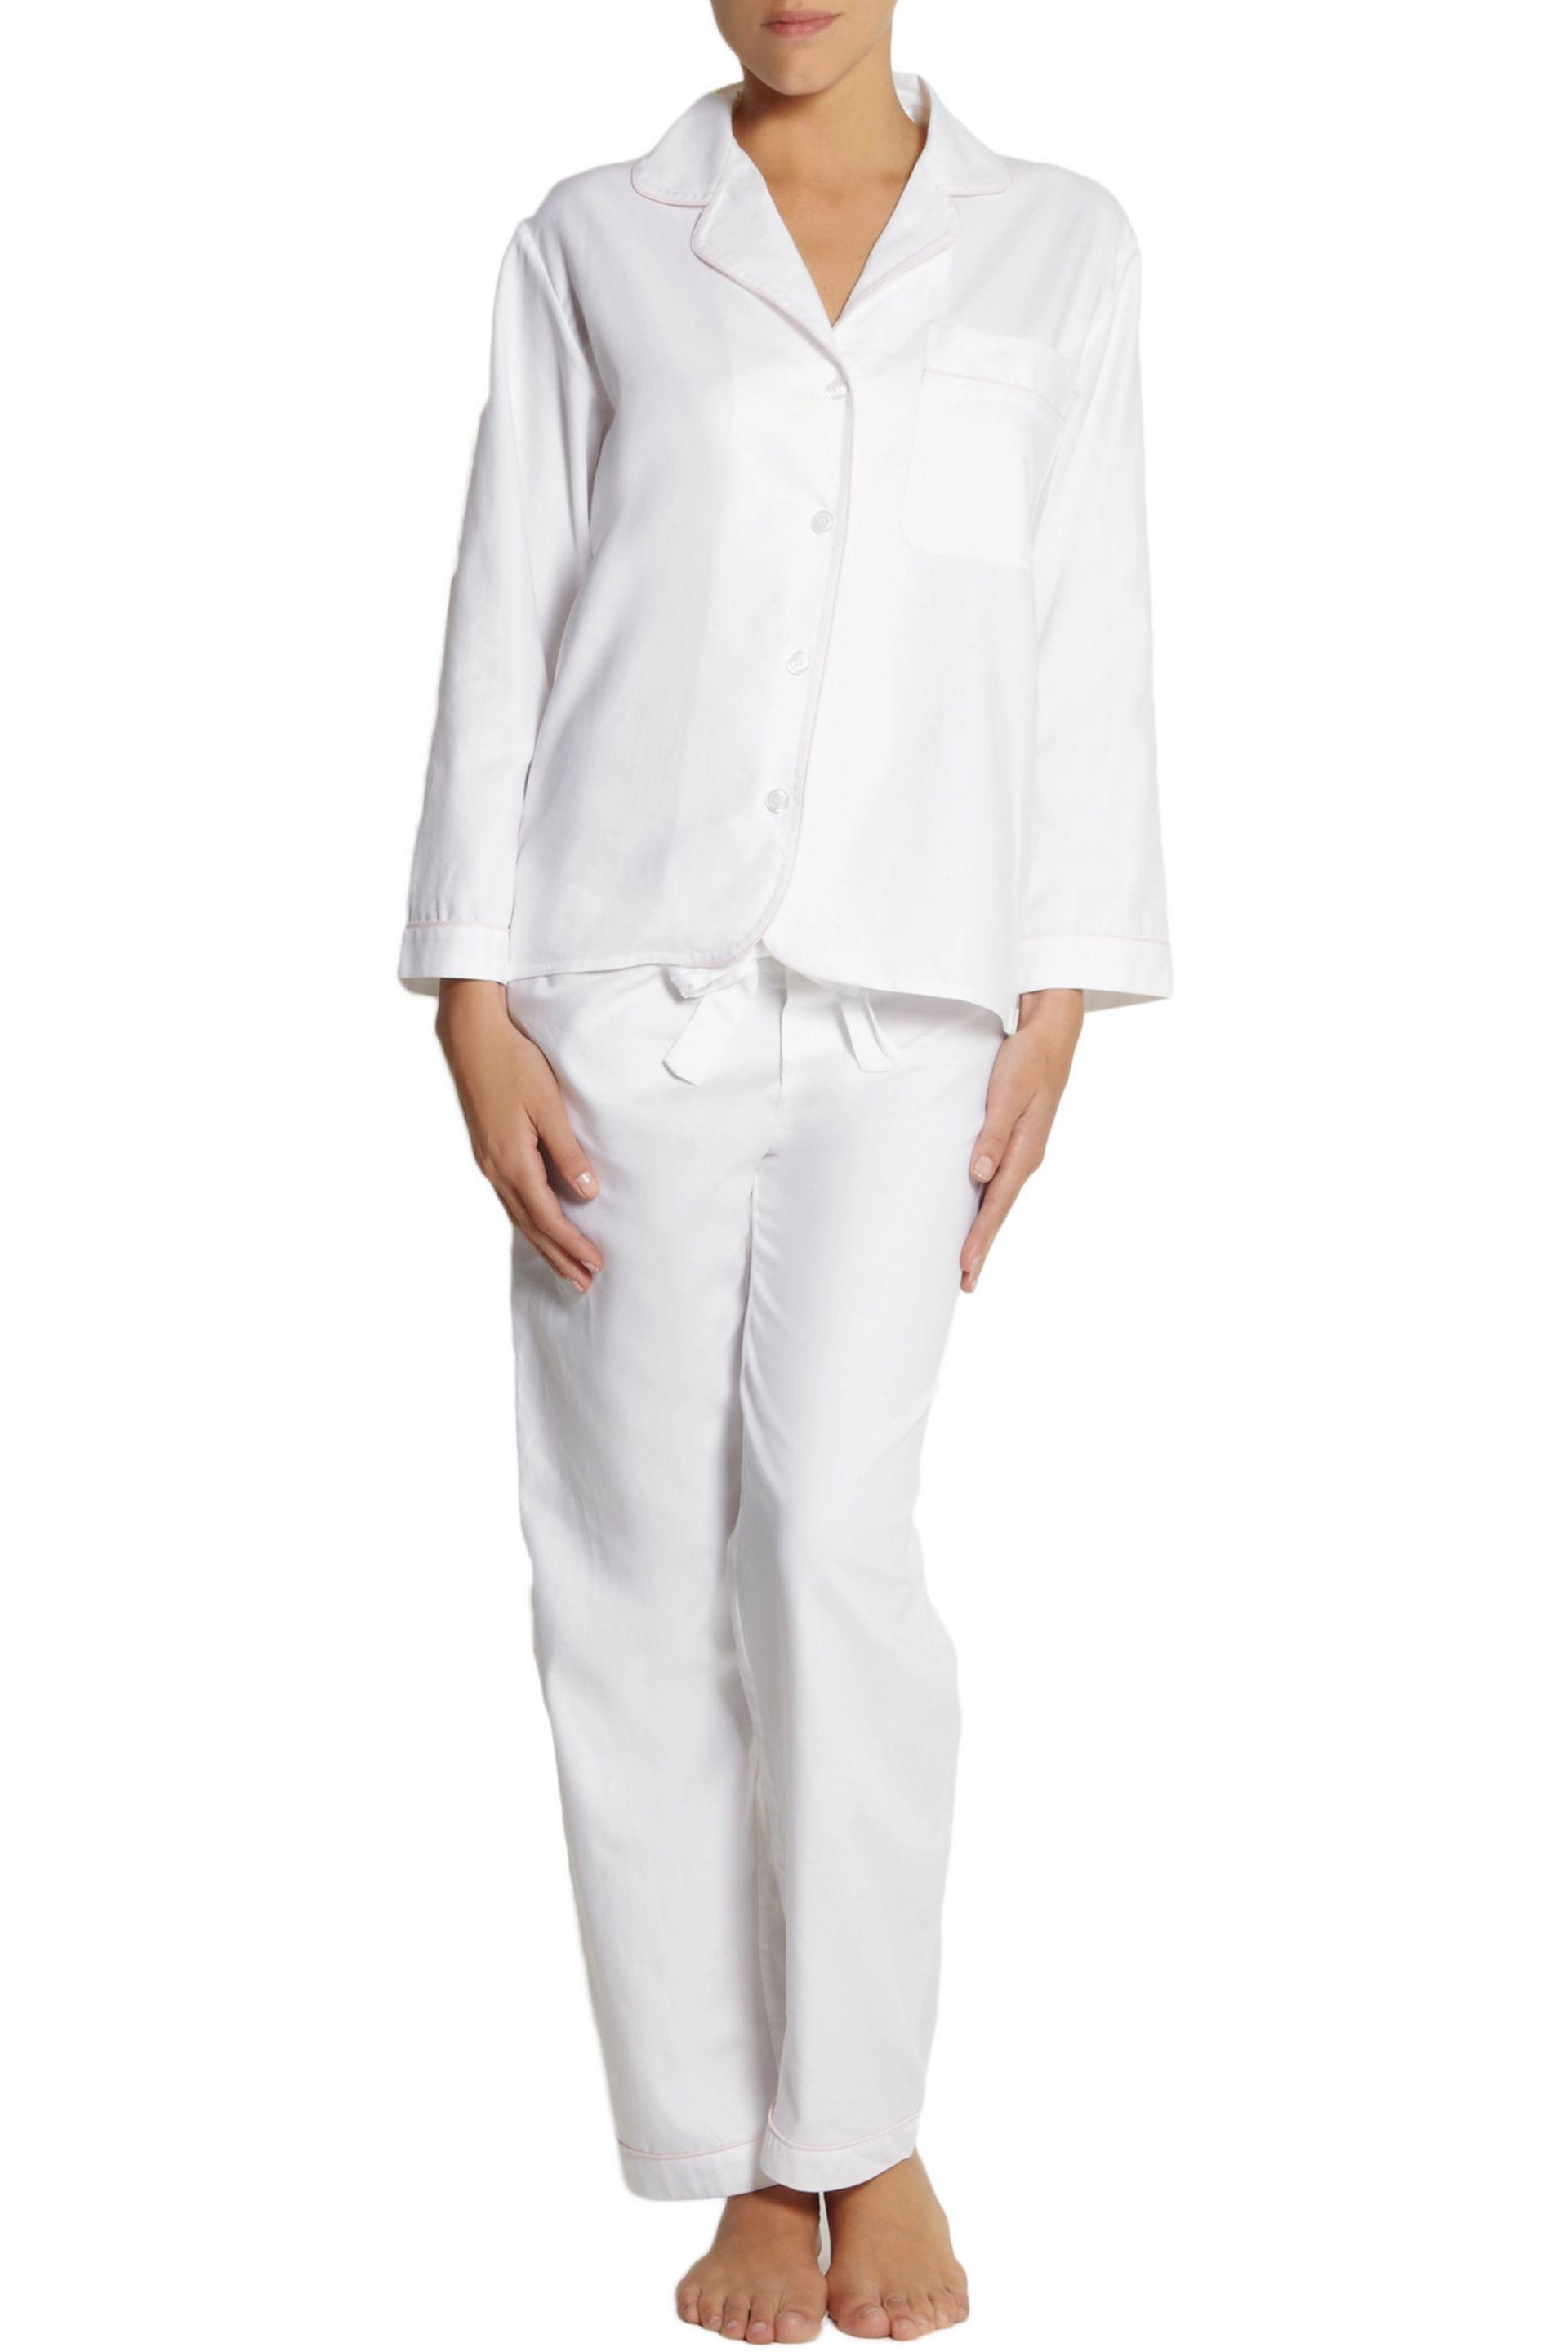 Bodas Cottontwill Pajama Pants in White - Lyst